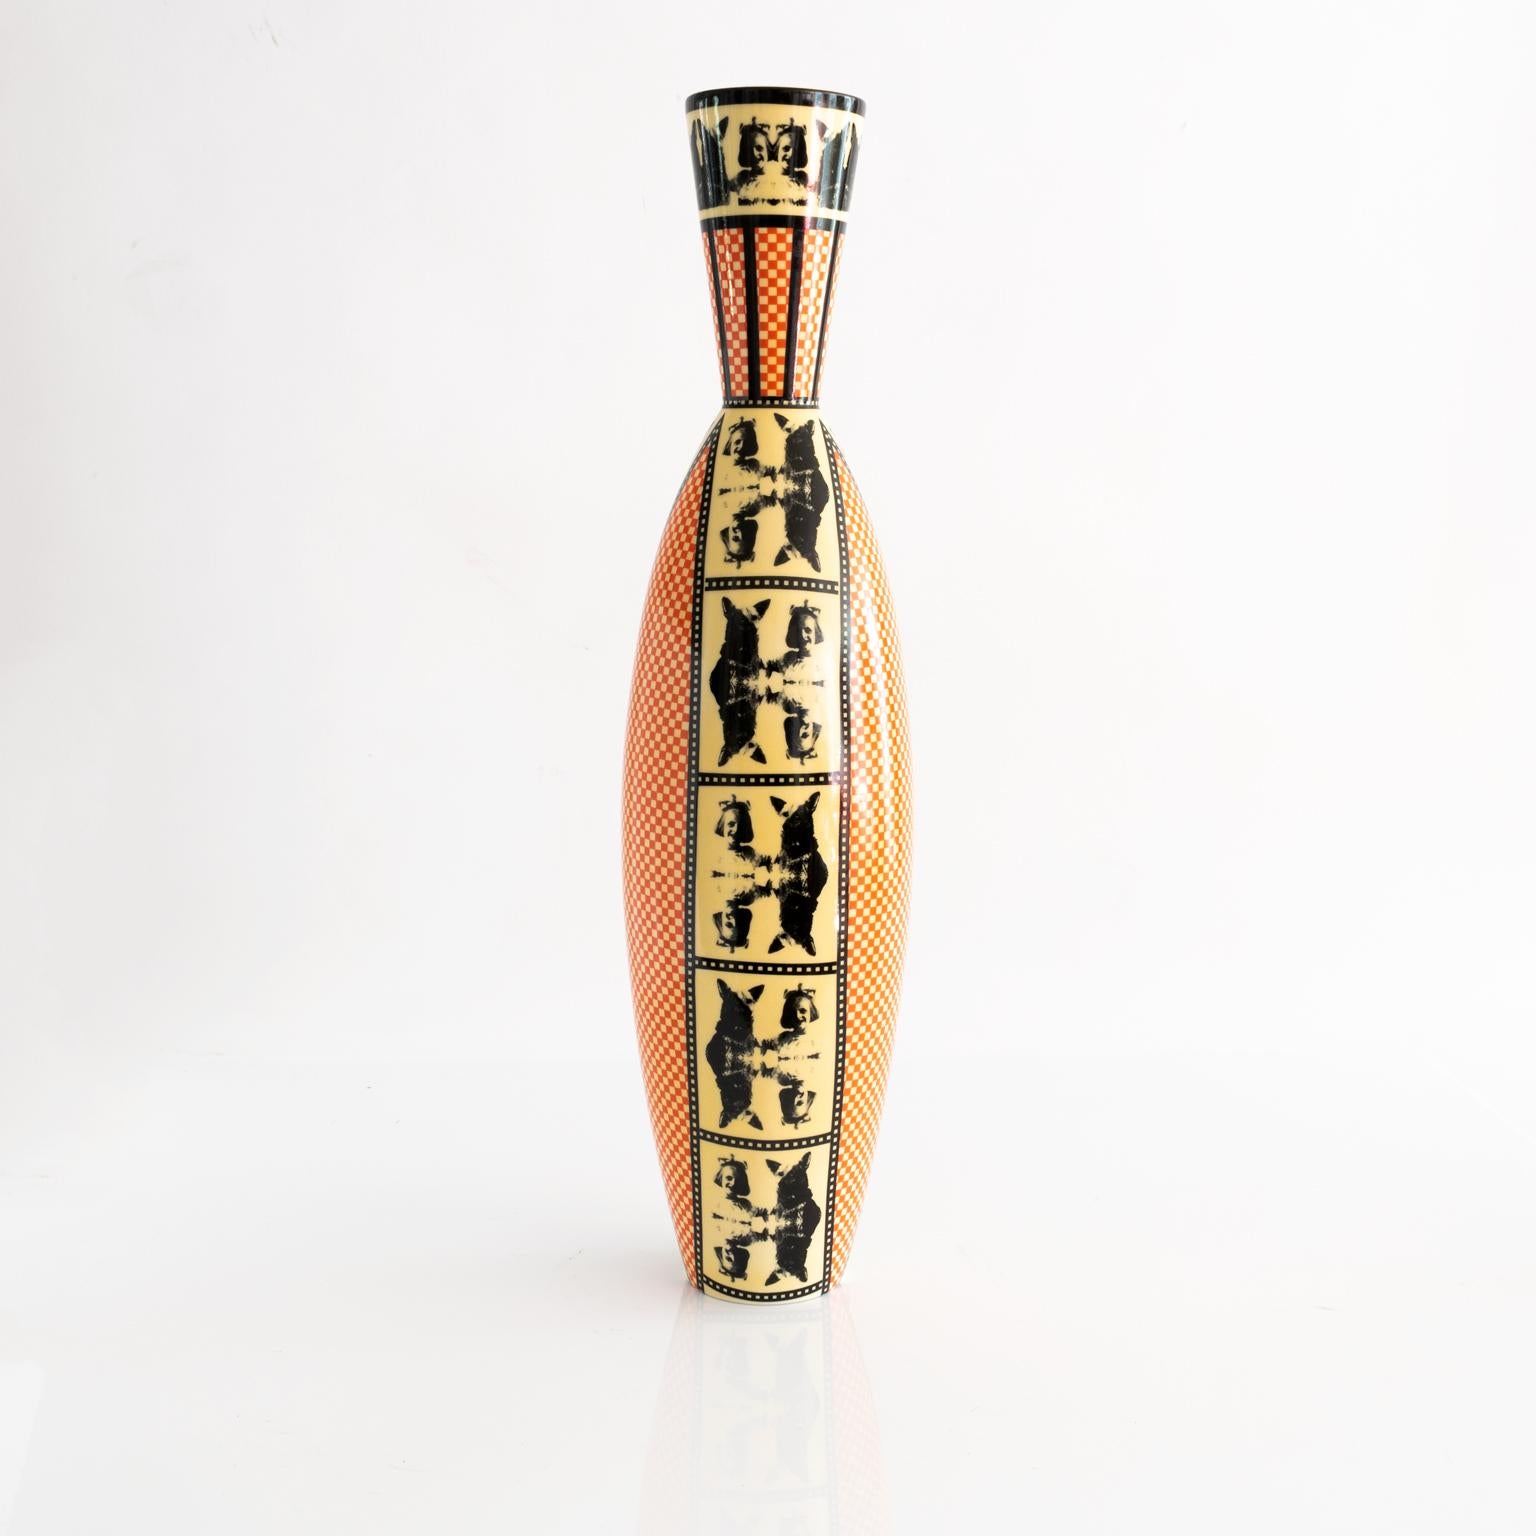 A tall porcelain Åsa Lindström vase for Rörstrand, decorated with a repeating pattern of a young girl with dog and an orange and yellow chequer pattern. Signed Rörstrand, Åsa Lindström, circa 1990.

Measures: Height 20.5